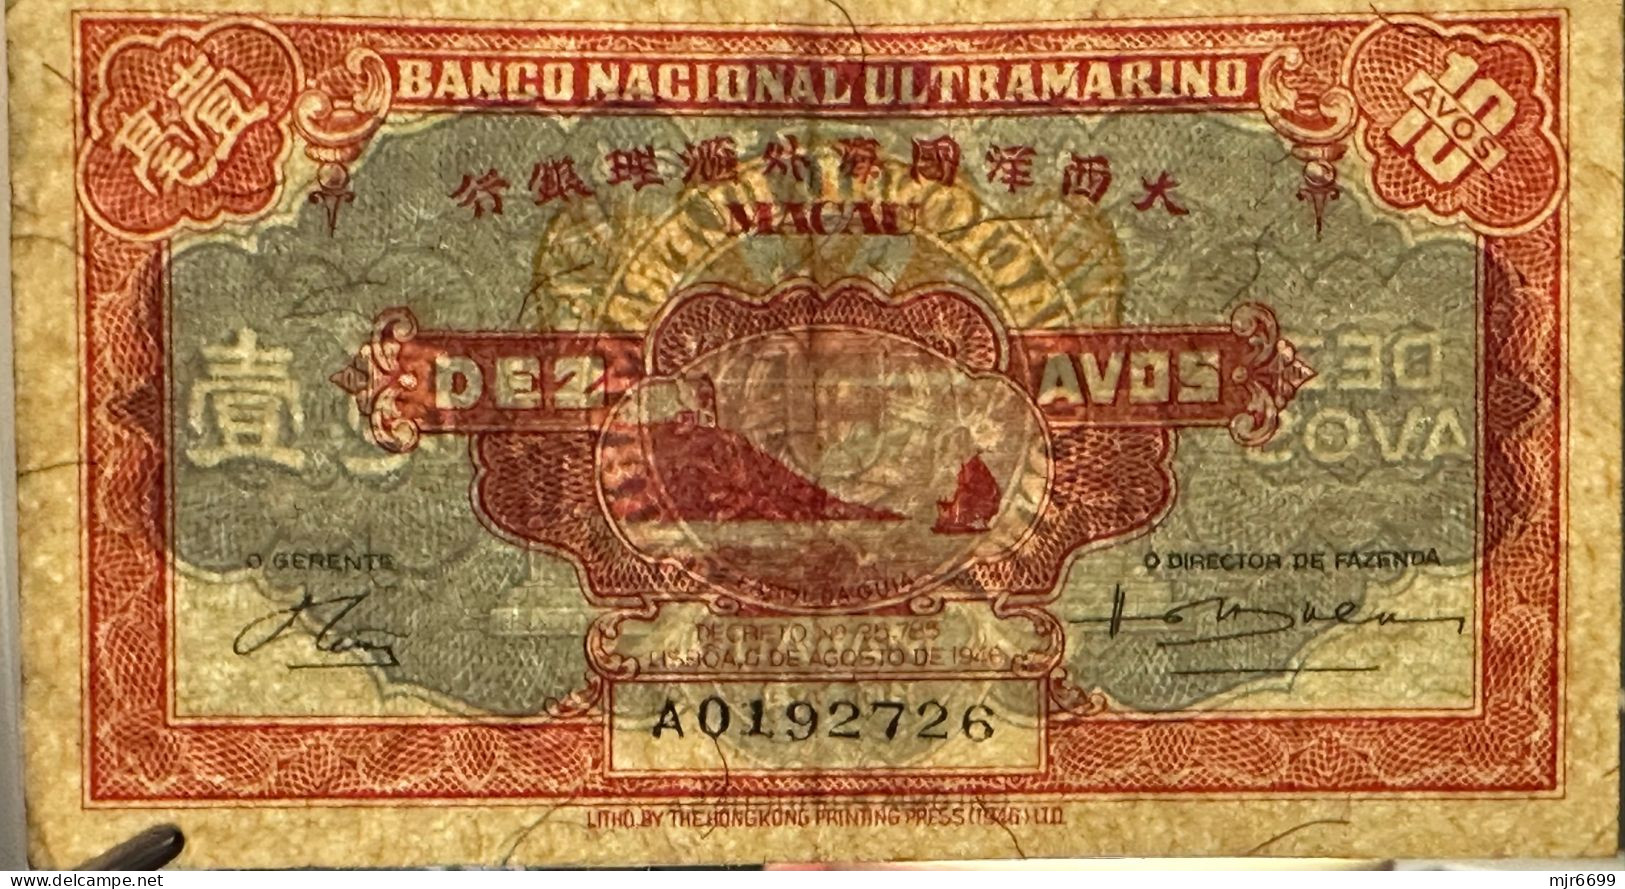 MACAU 1946 BNU 10 AVOS PICK#36a x 5 W/ALL 5 PREFIX A,B,C,D,E. V\F. WITH FOLDS, NO HOLES